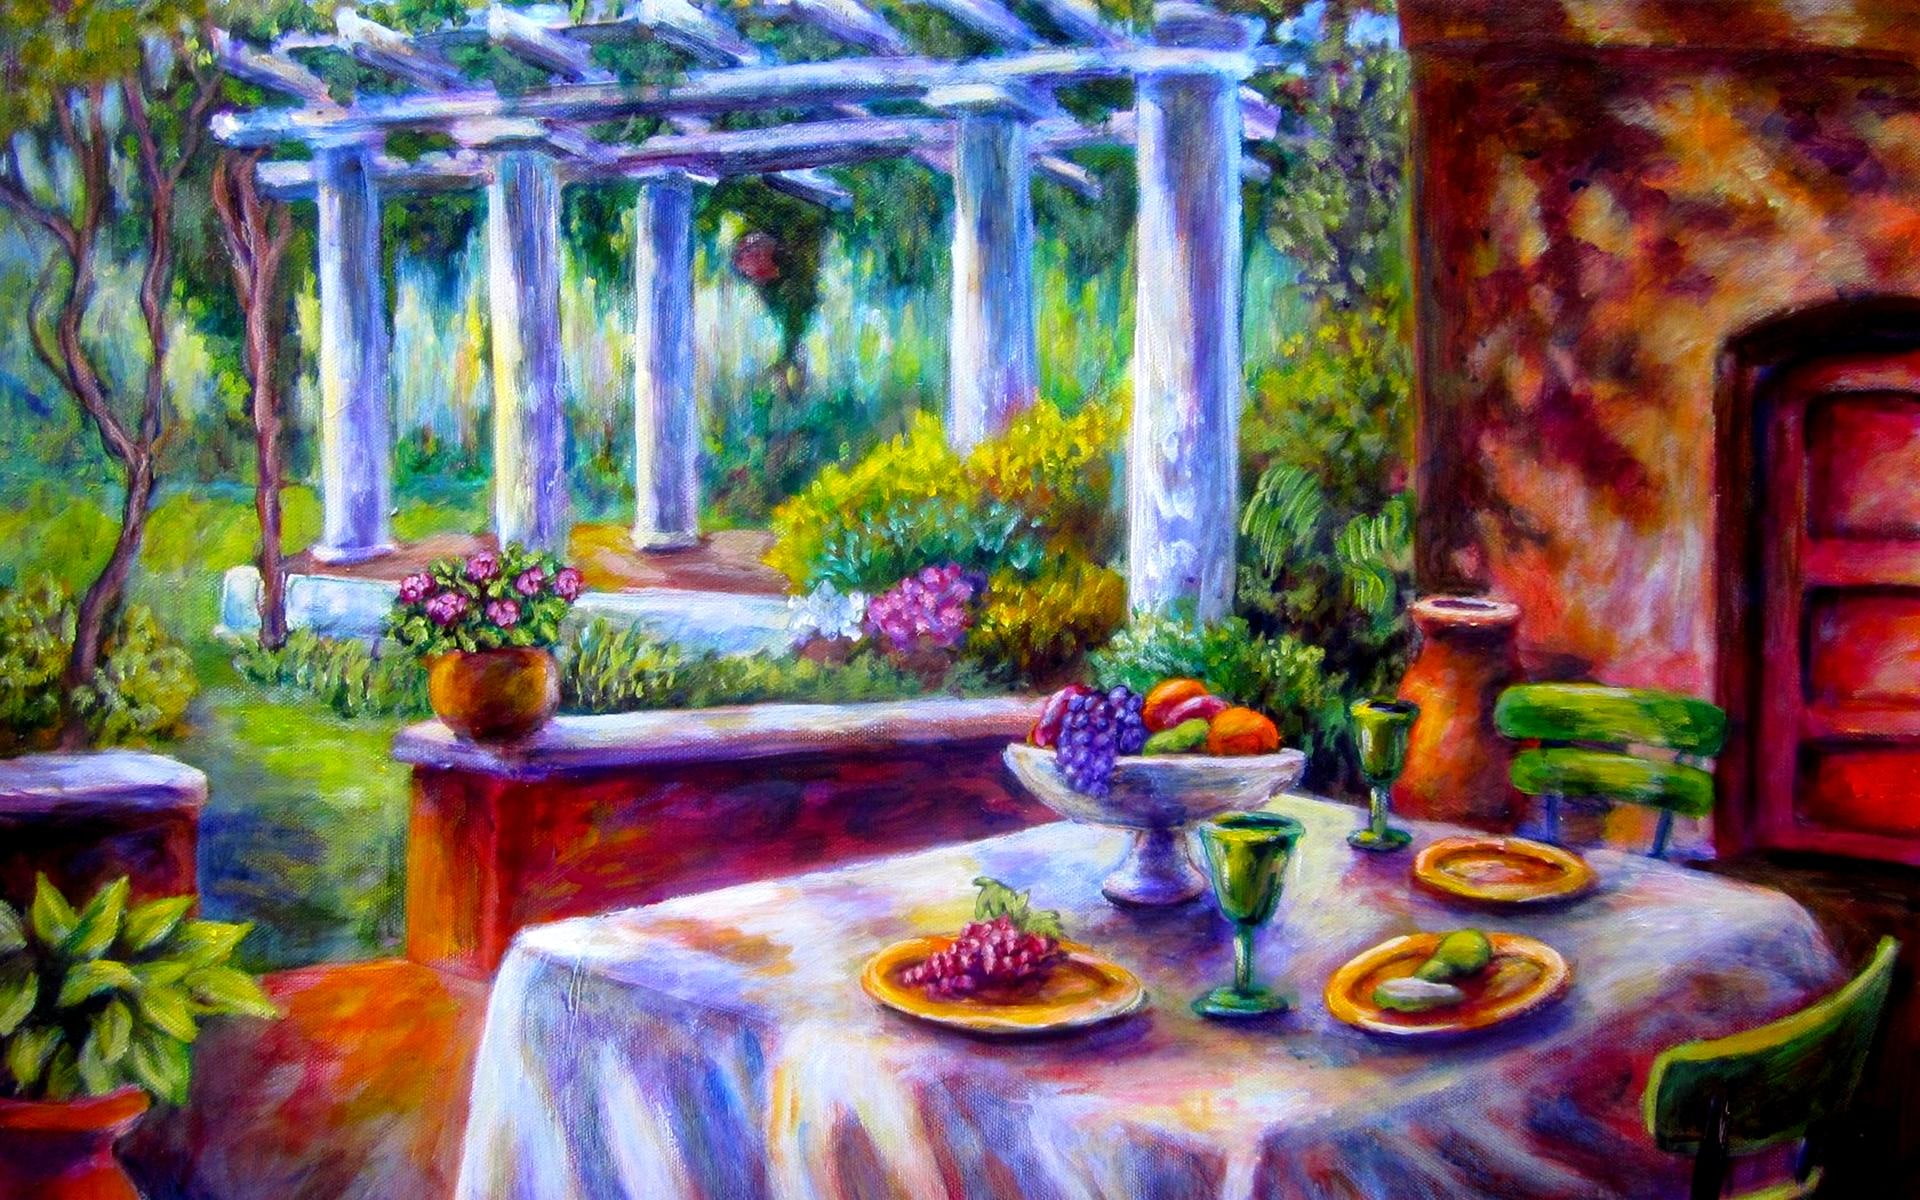 Leisure & Pleasure, fruits, chair, table, garden, painting